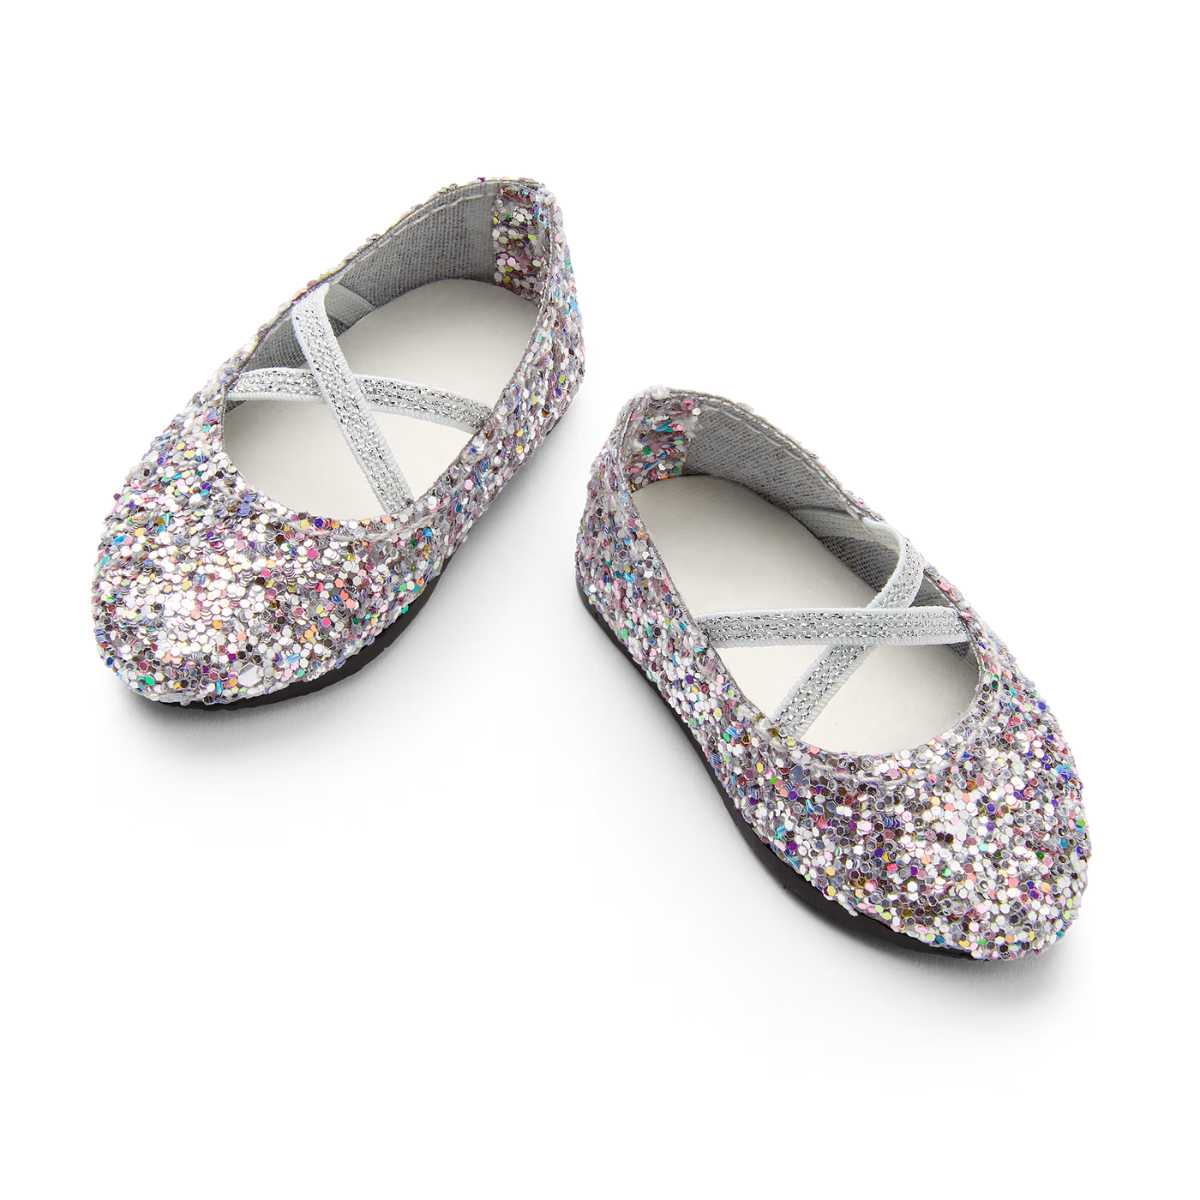 American Girl x Something Navy Twinkling Tinsel Ballet Flats for 18-inch Dolls - Simon's Collectibles